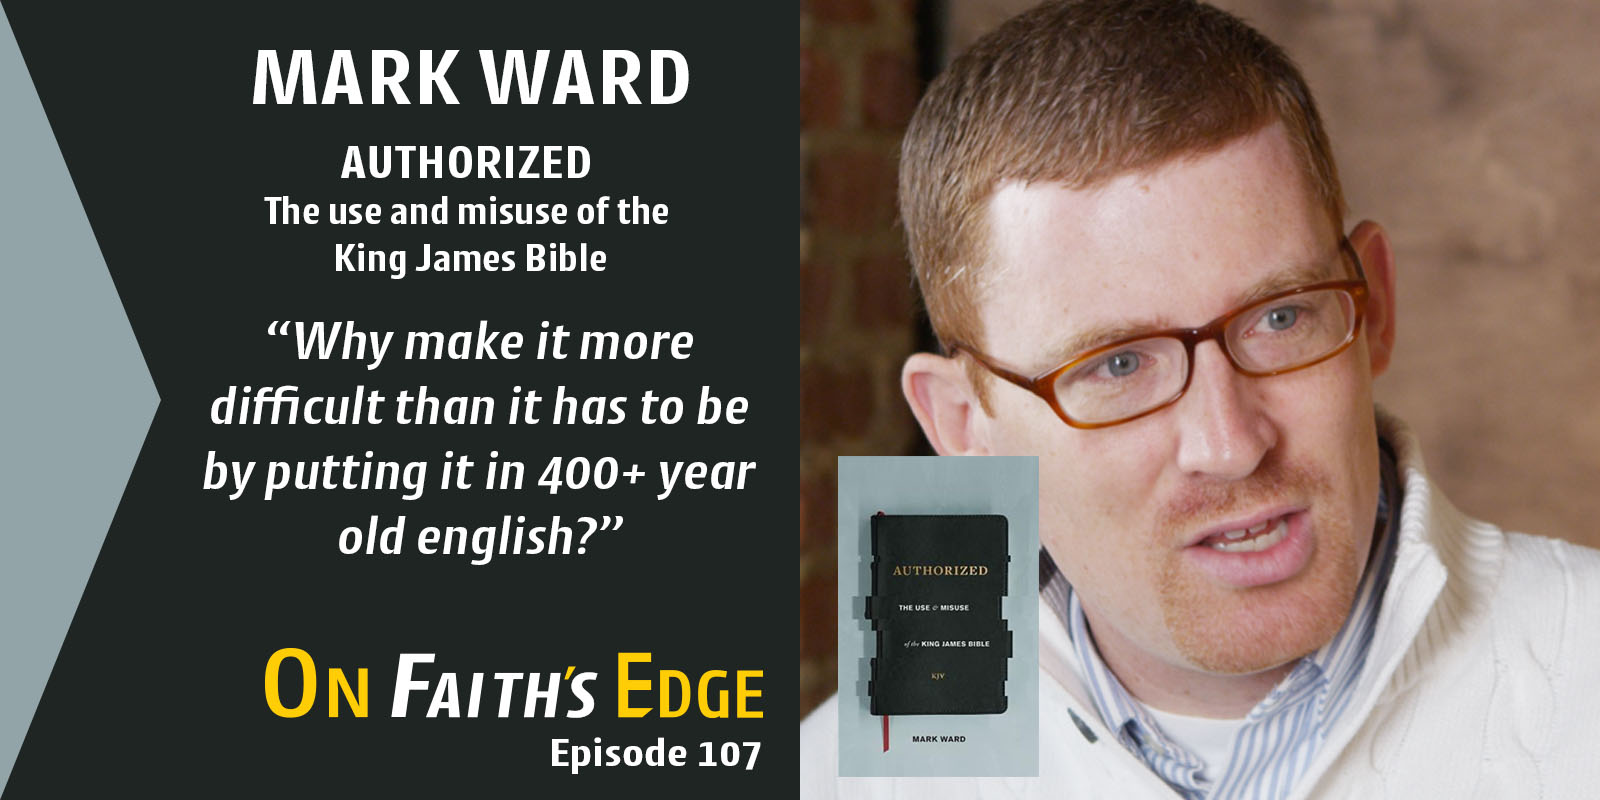 The Use and Misuse of the King James Bible – Author Mark Ward | Episode 107